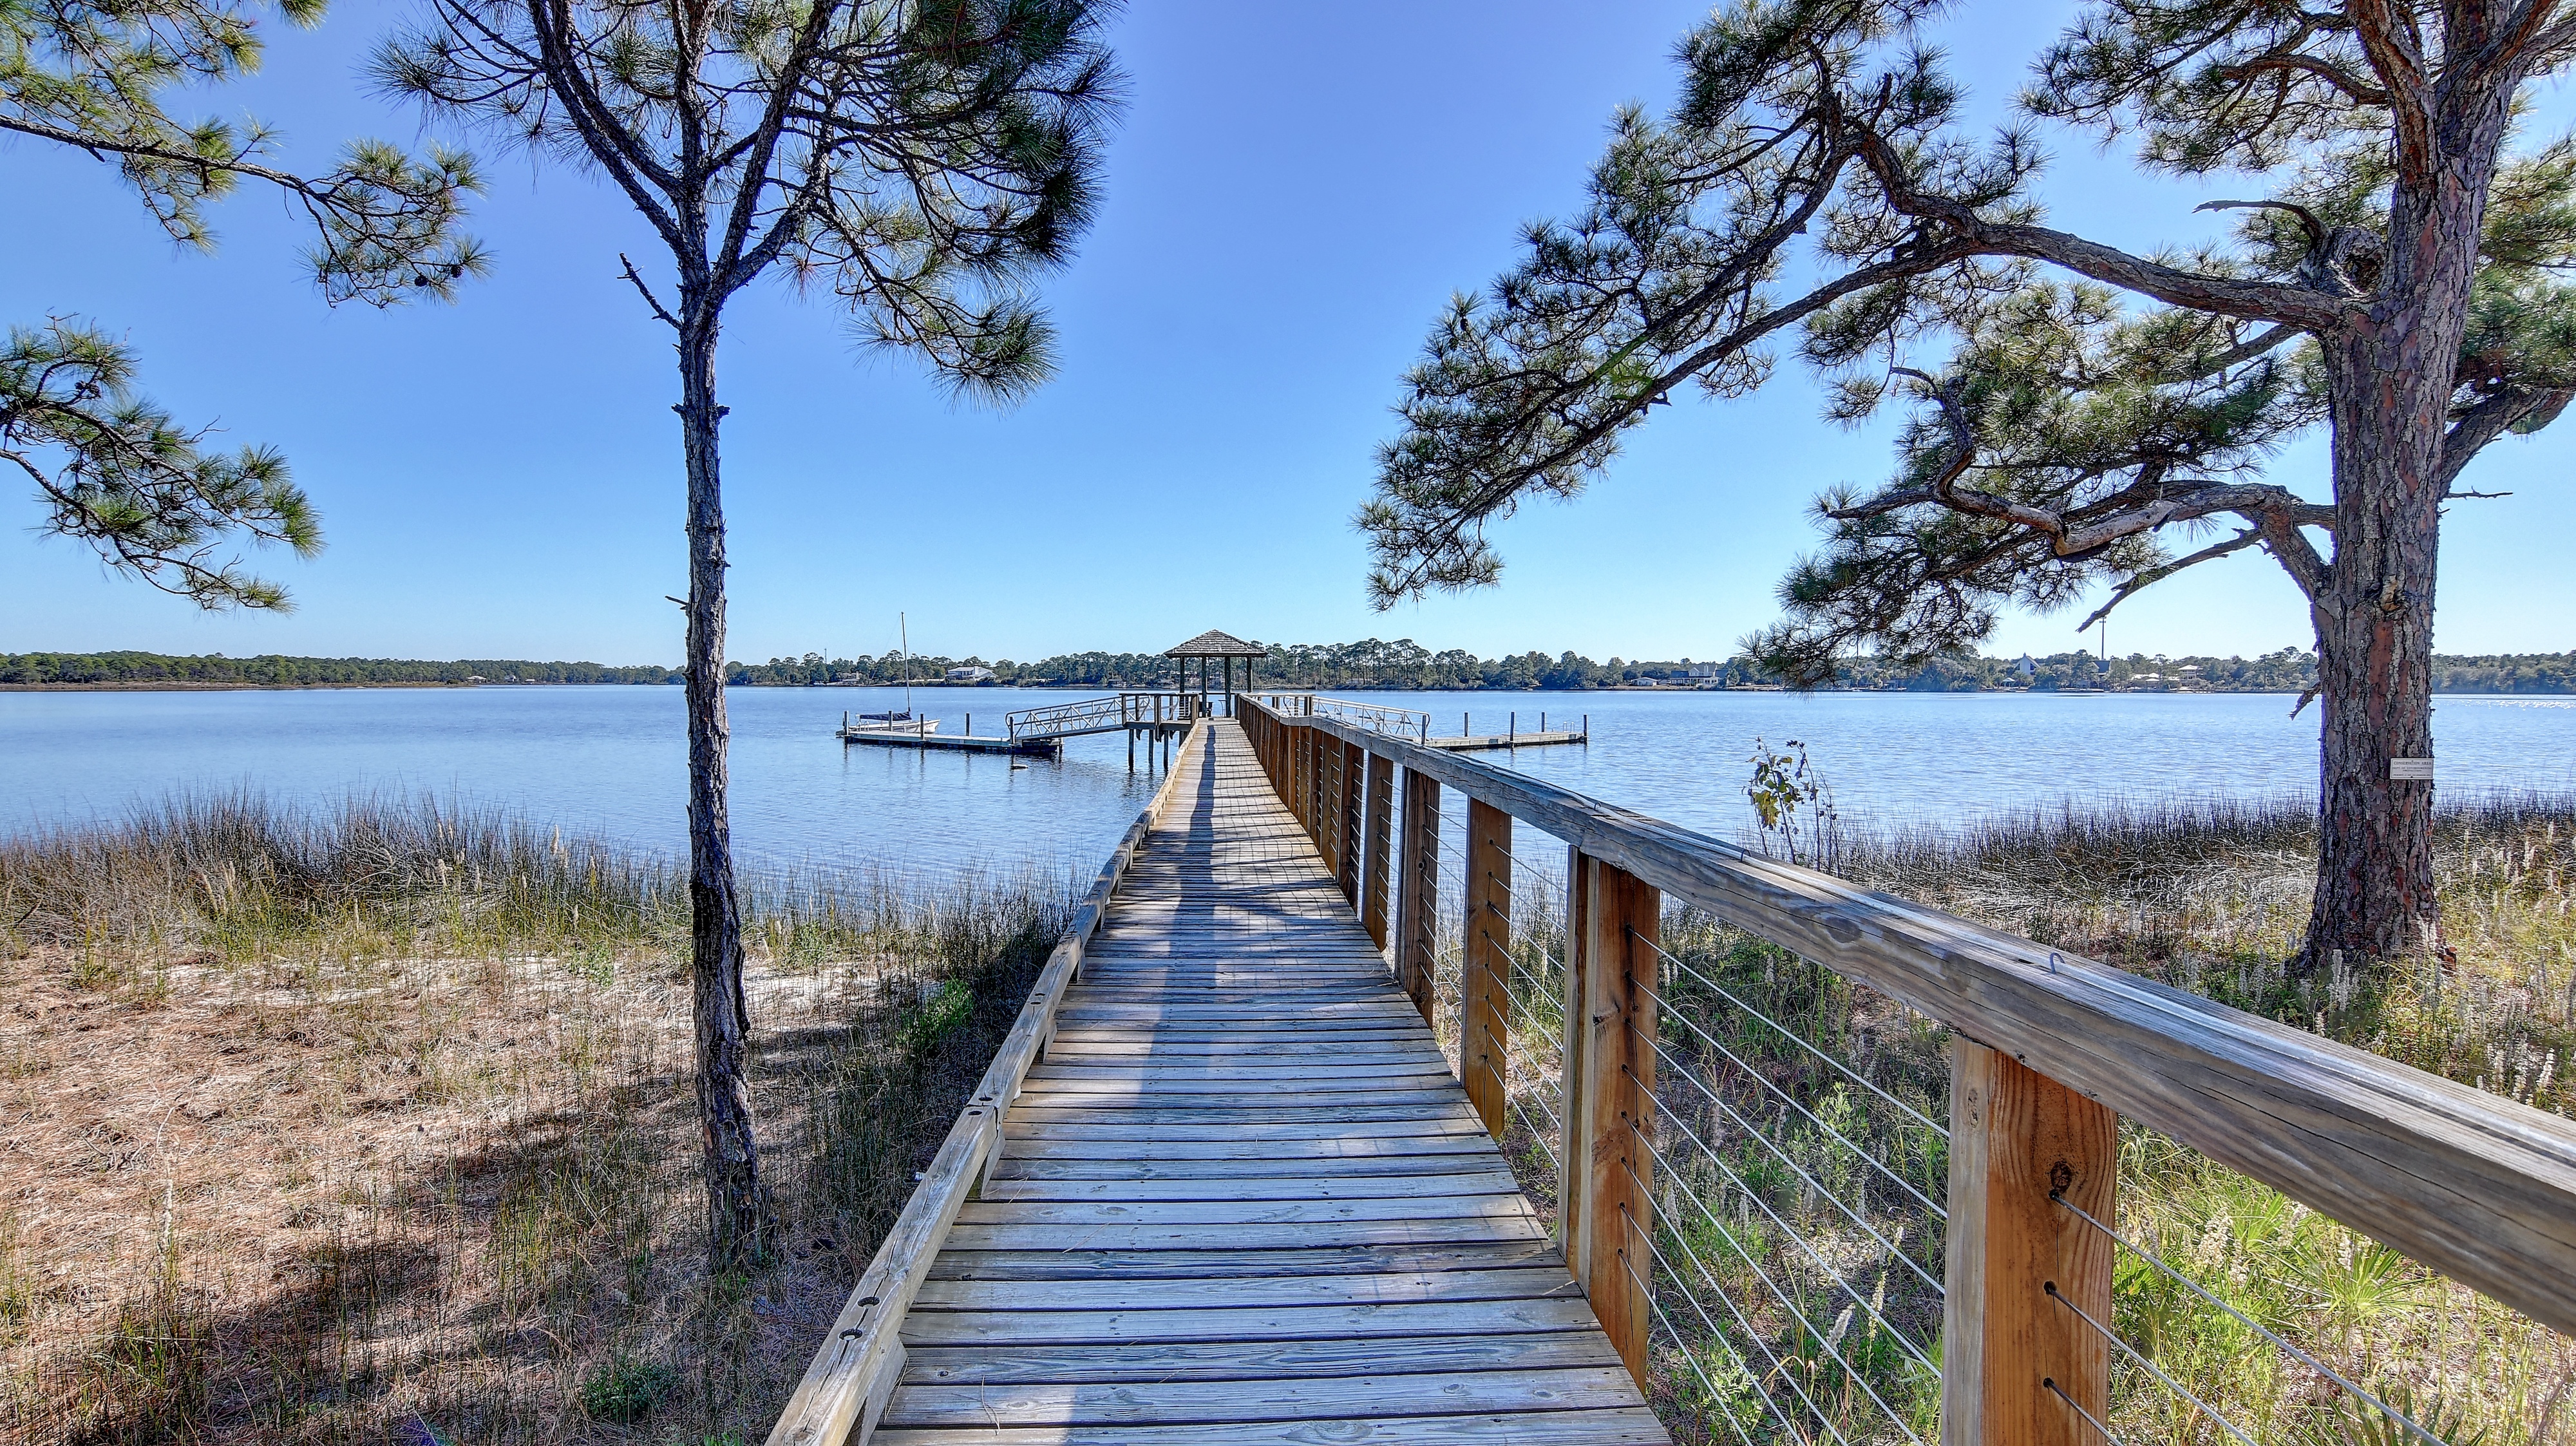 A view of the boardwalk out to the lake at Wild Heron